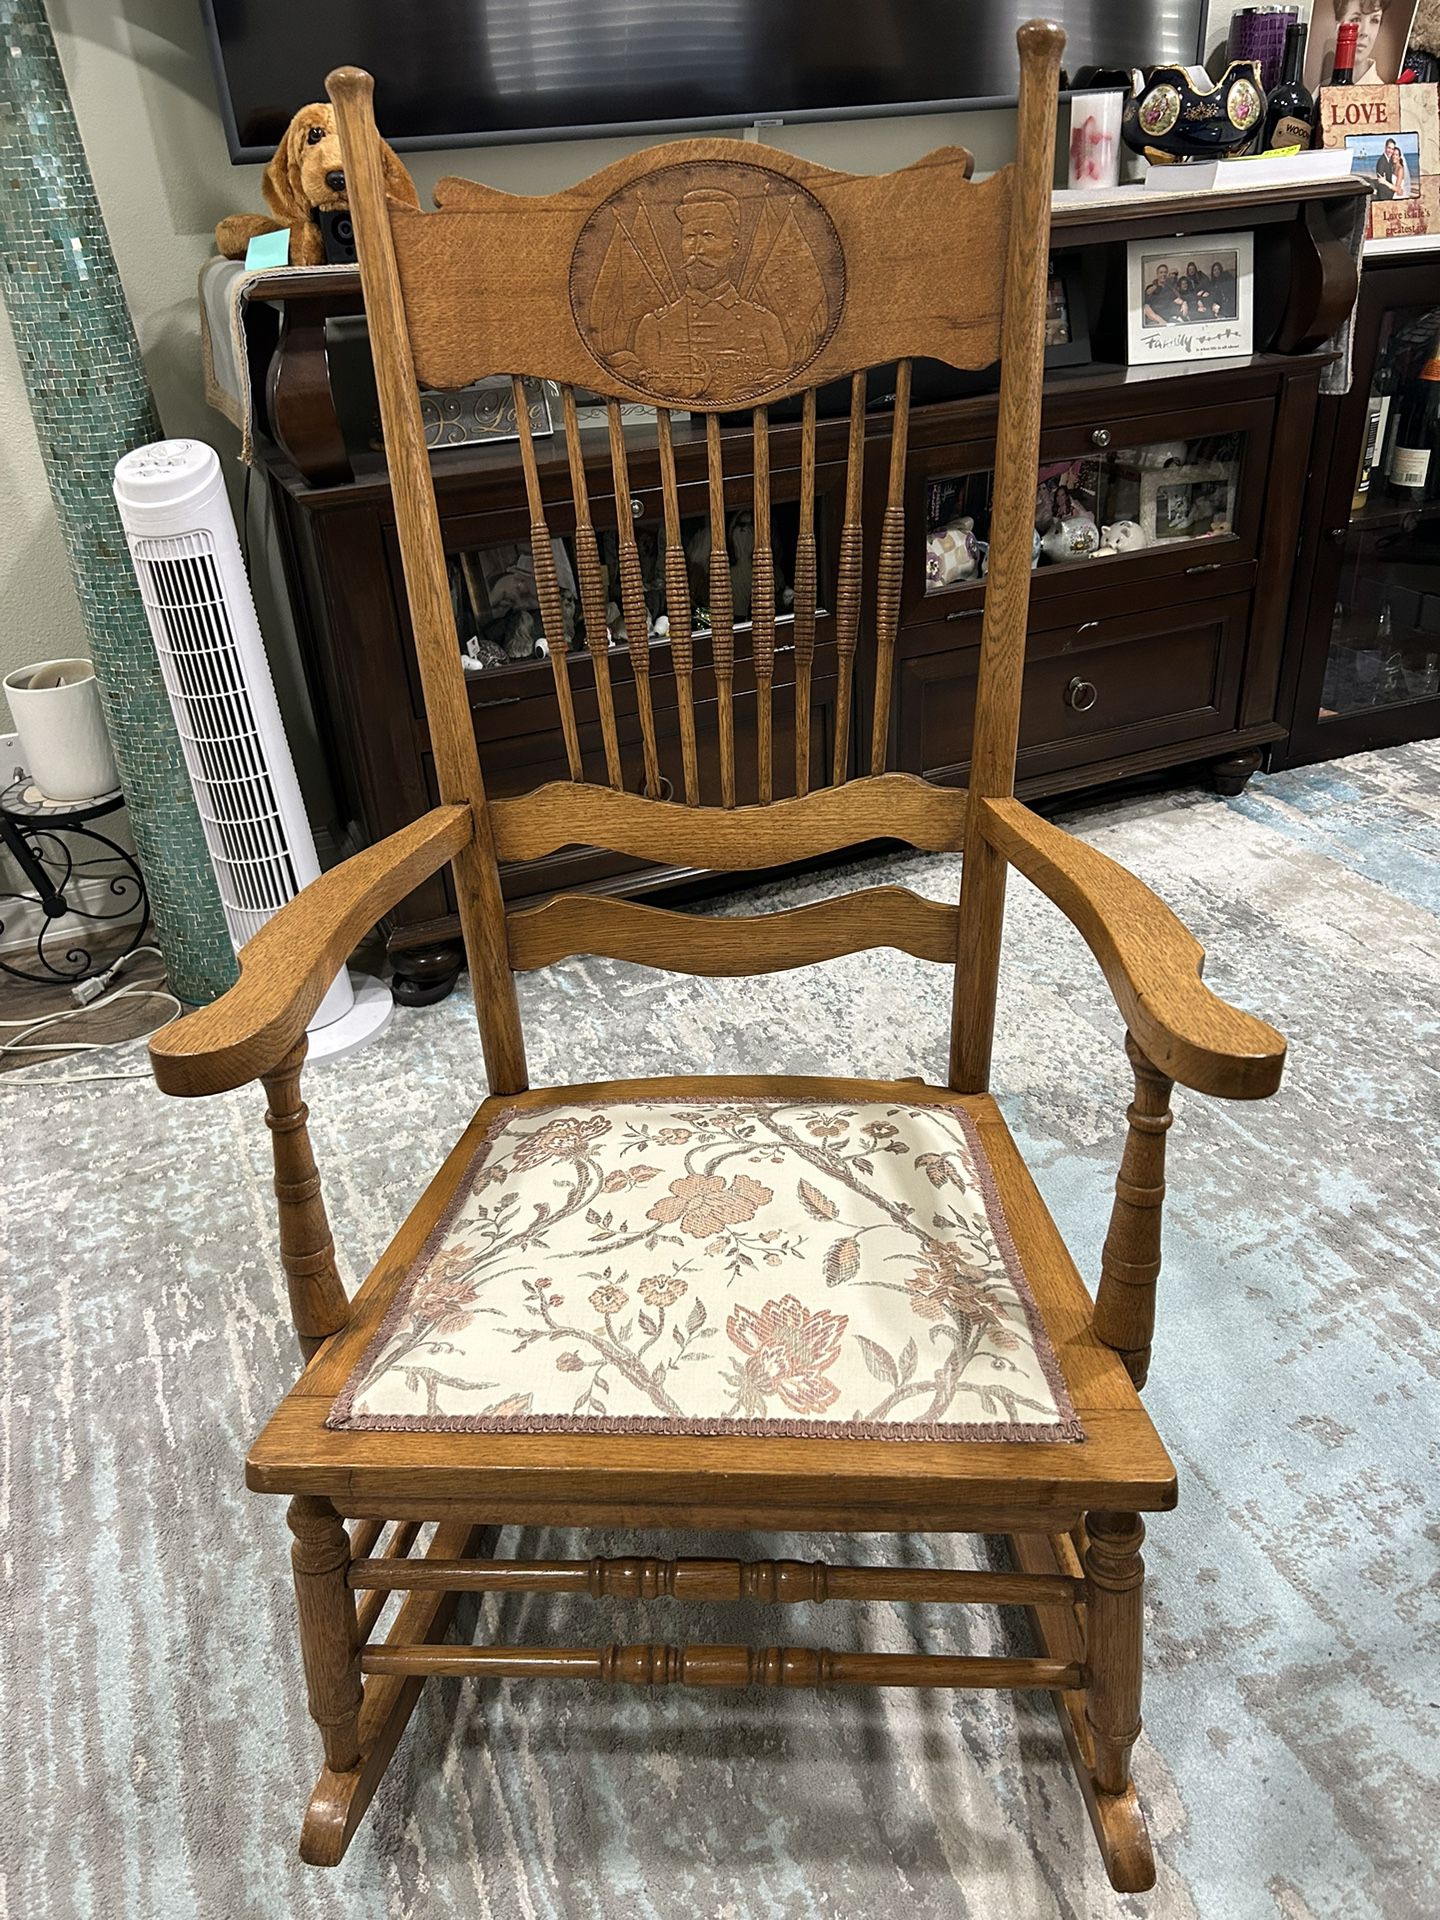 100 Plus Year Old Rocking Chair